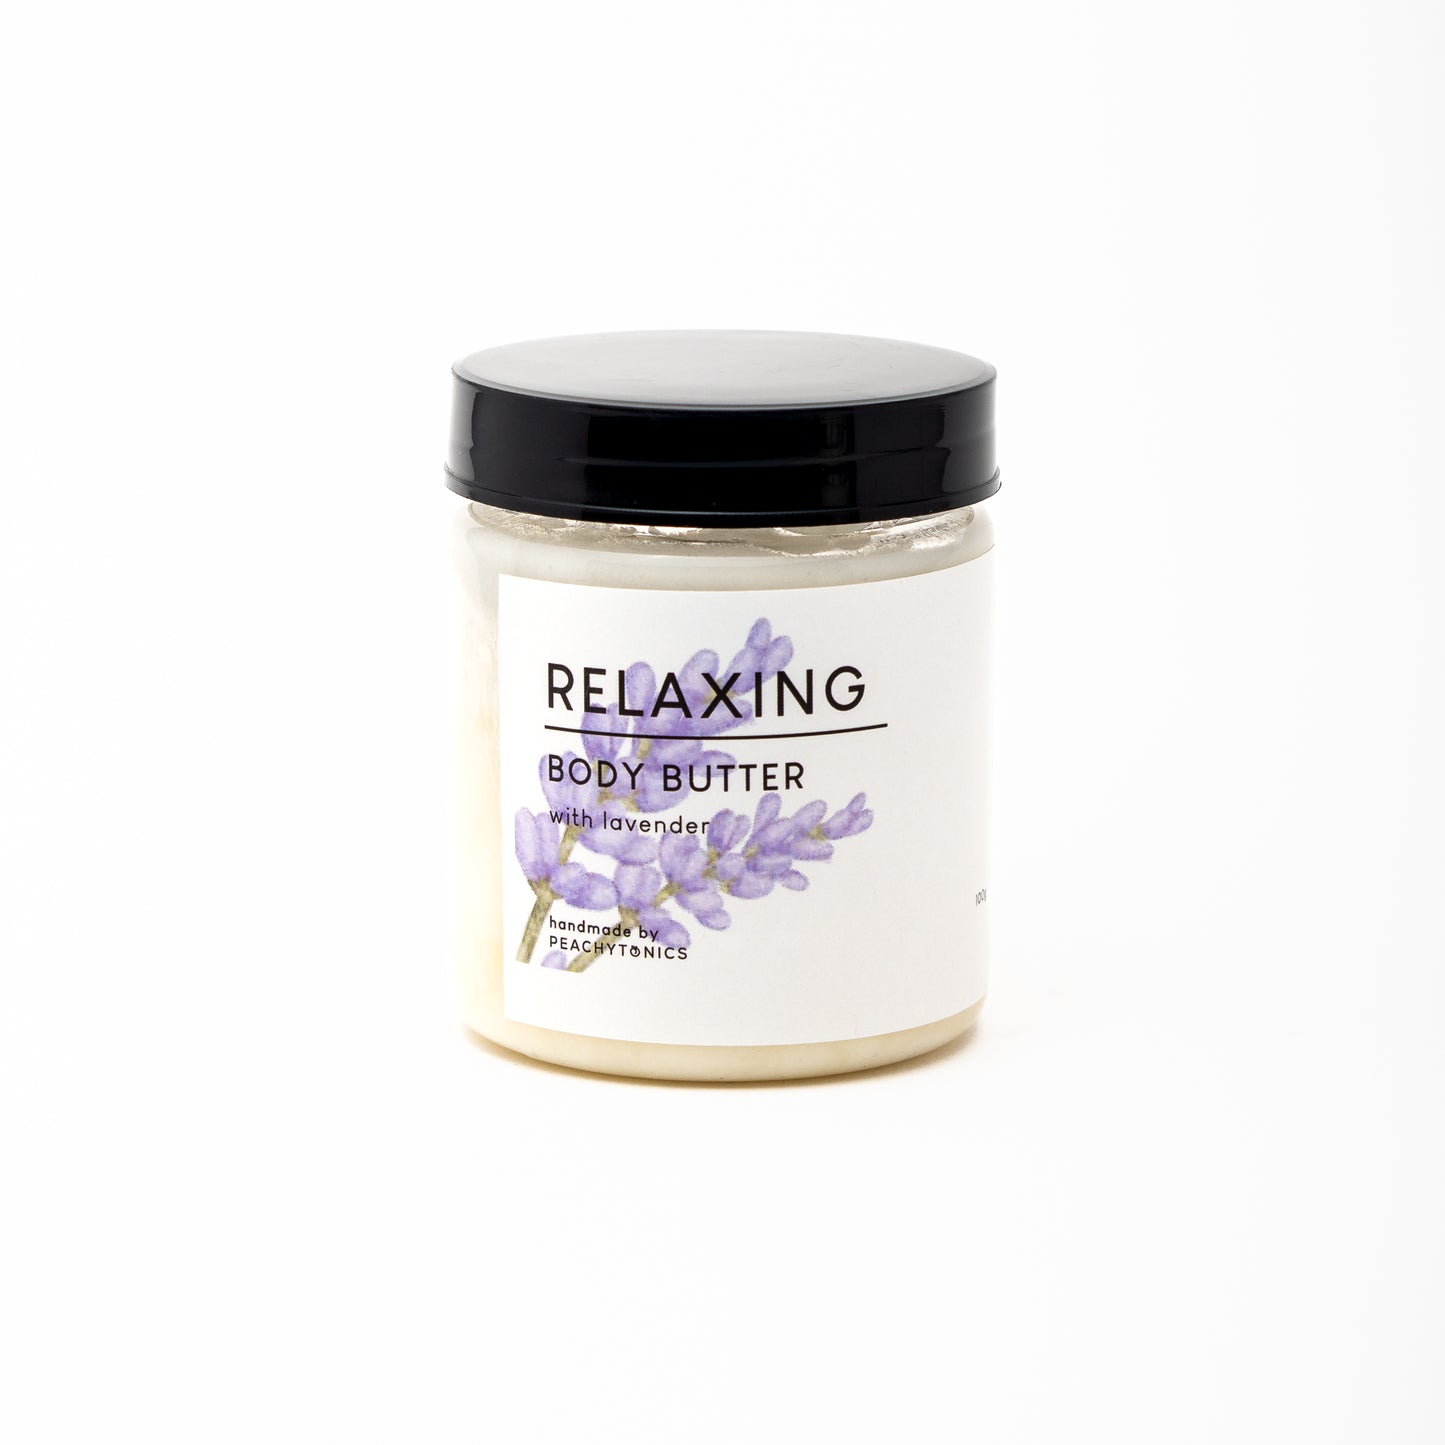 Relaxing Body Butter with Lavender